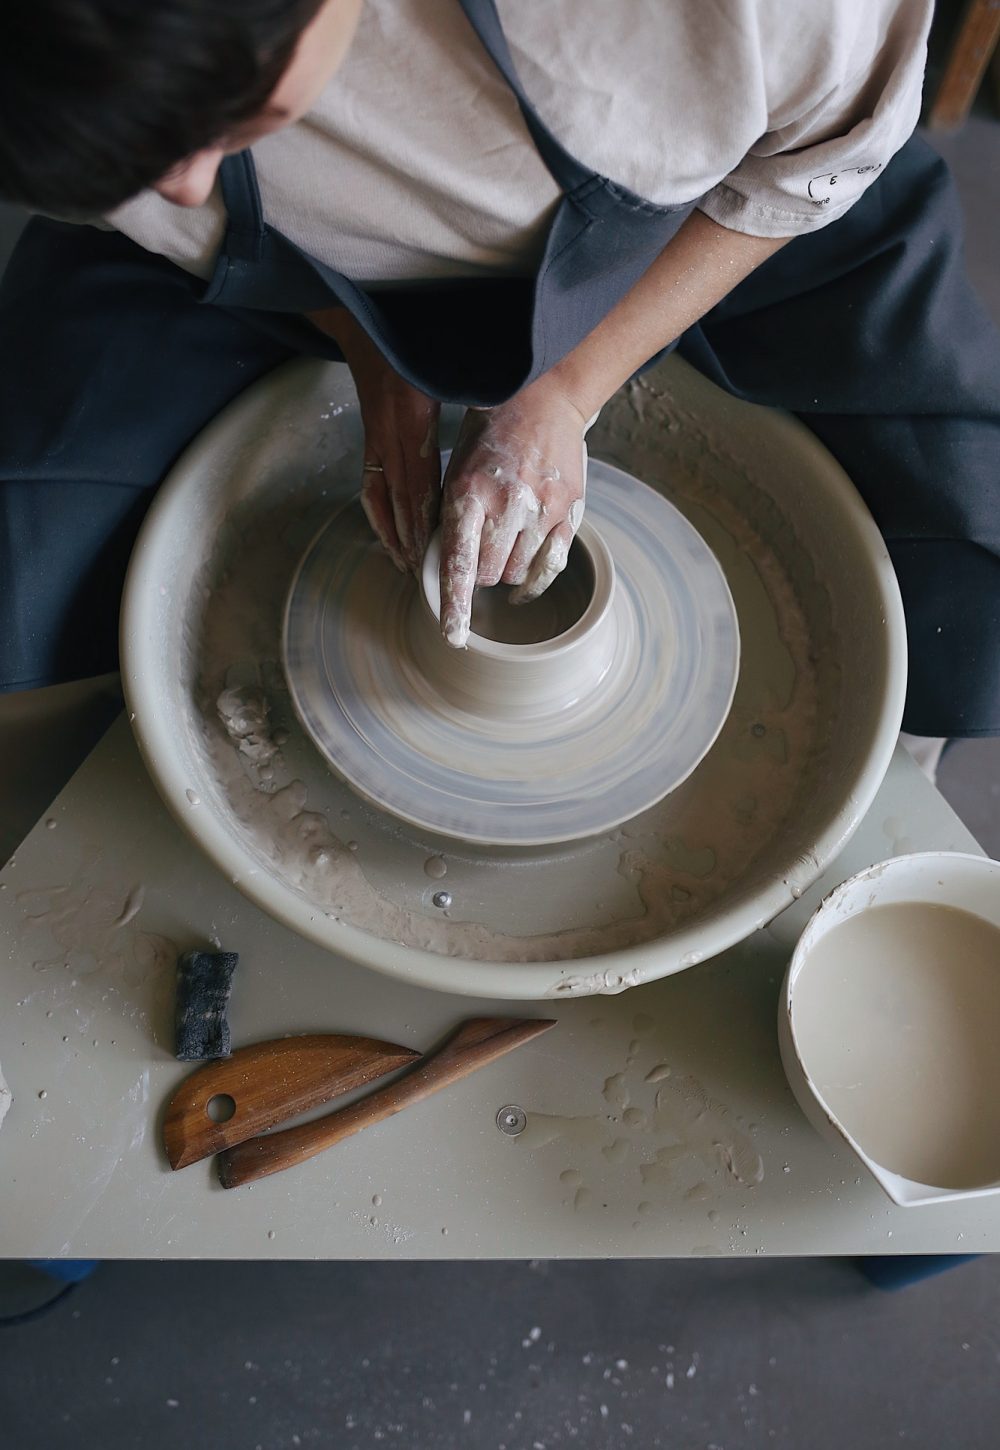 working-on-a-potter-s-wheel-with-a-clay-in-a-pottery-studio-clay-jug.jpg